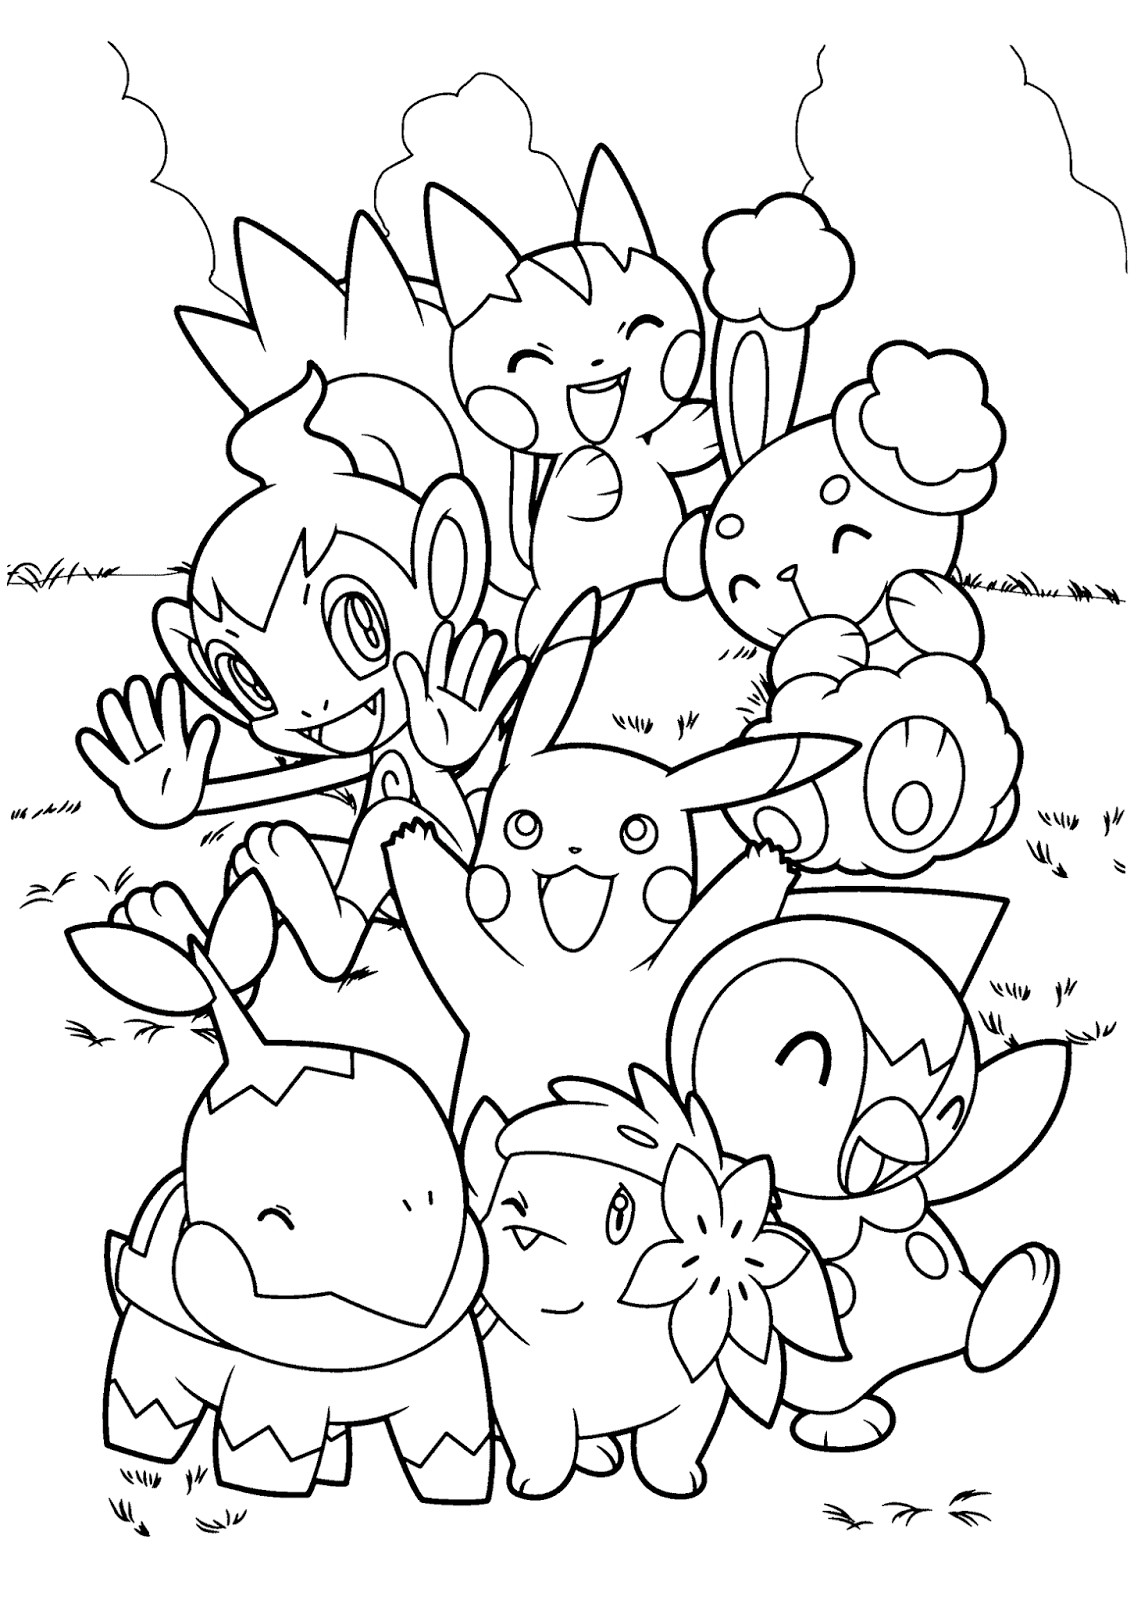 Starter Pokemon Coloring Pages at GetDrawings | Free download